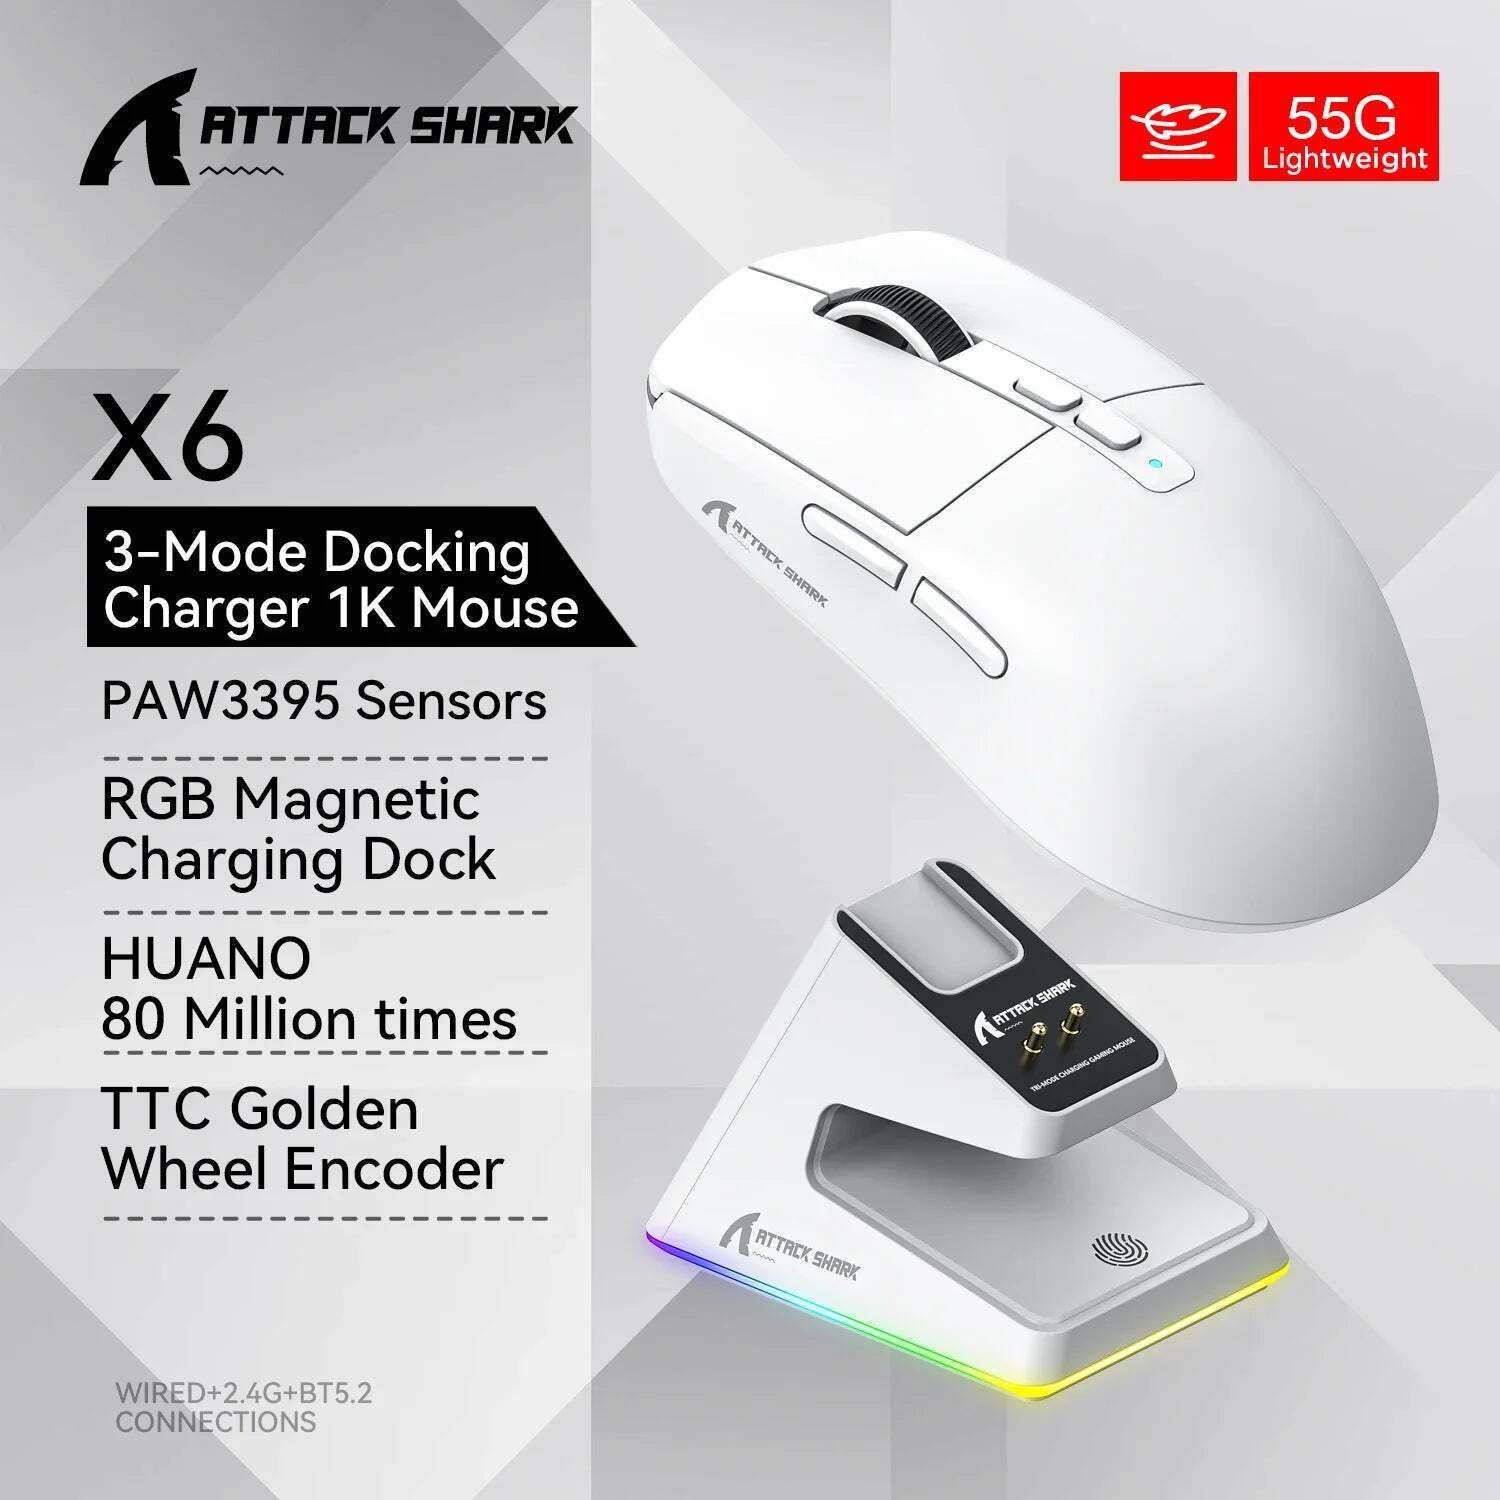 Attack Shark X6 Bluetooth Mouse , PixArt PAW3395, Tri-Mode Connection